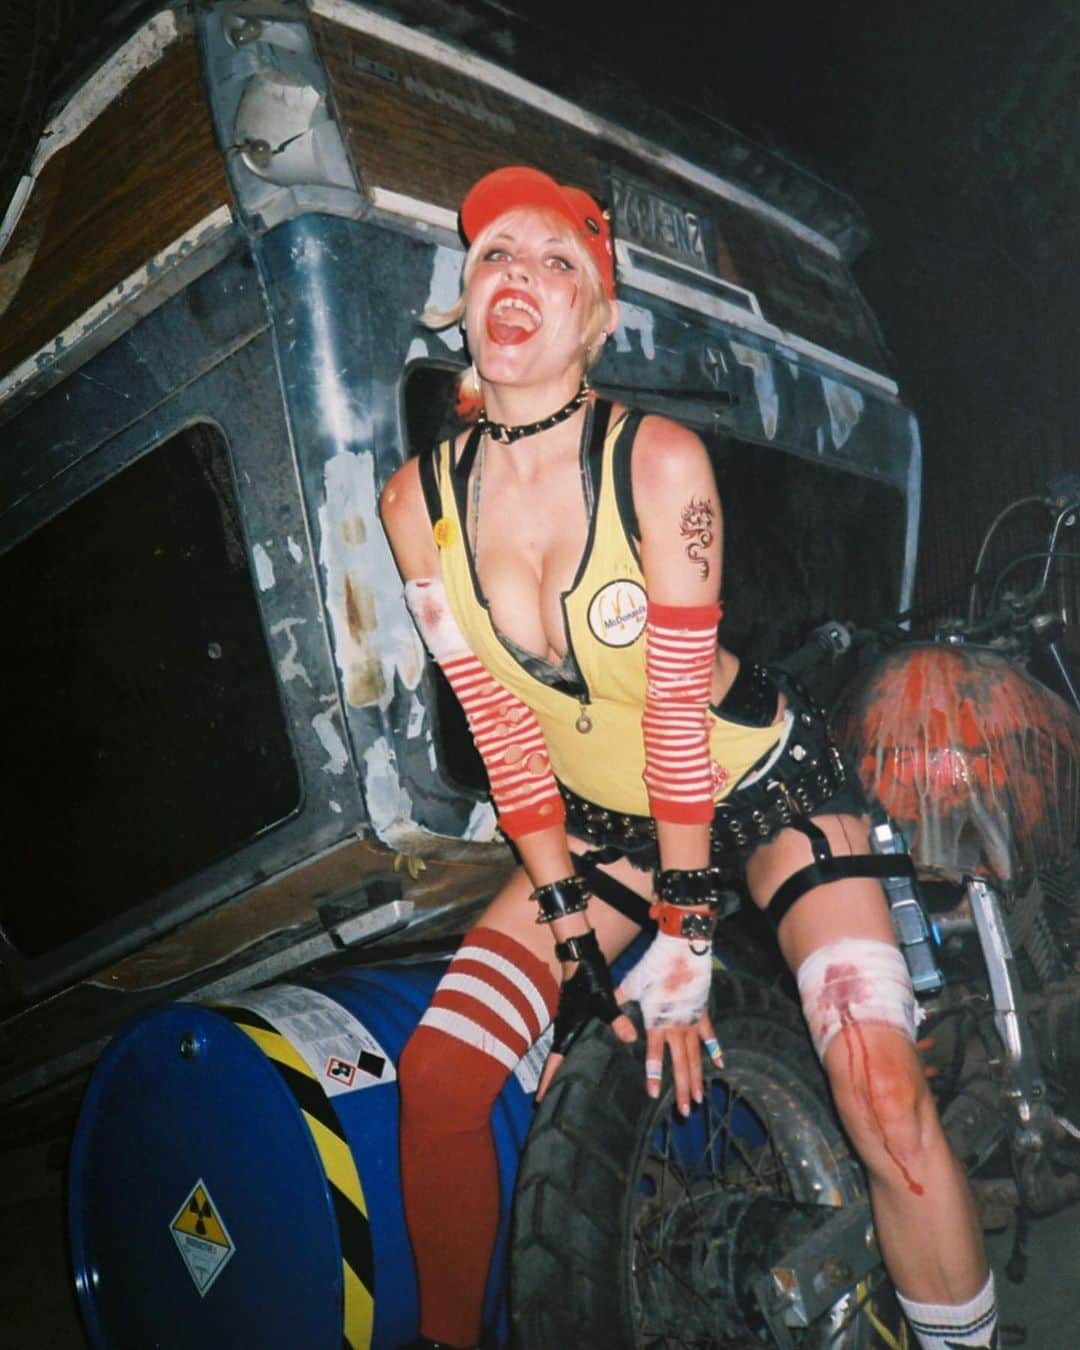 Ashley Smithのインスタグラム：「☢️🍟⚠️ what a sick weekend, @dm_trashworld had their DJ set debut at the apocalypse and then played their 2nd show at the hardcore goth prom. I was proud of my Tank girl X Mcdonalds costume too. I think I’ll sleep until next Halloween now 😴Thanks @patrickliam and @miriam_marlene for the sick pics」